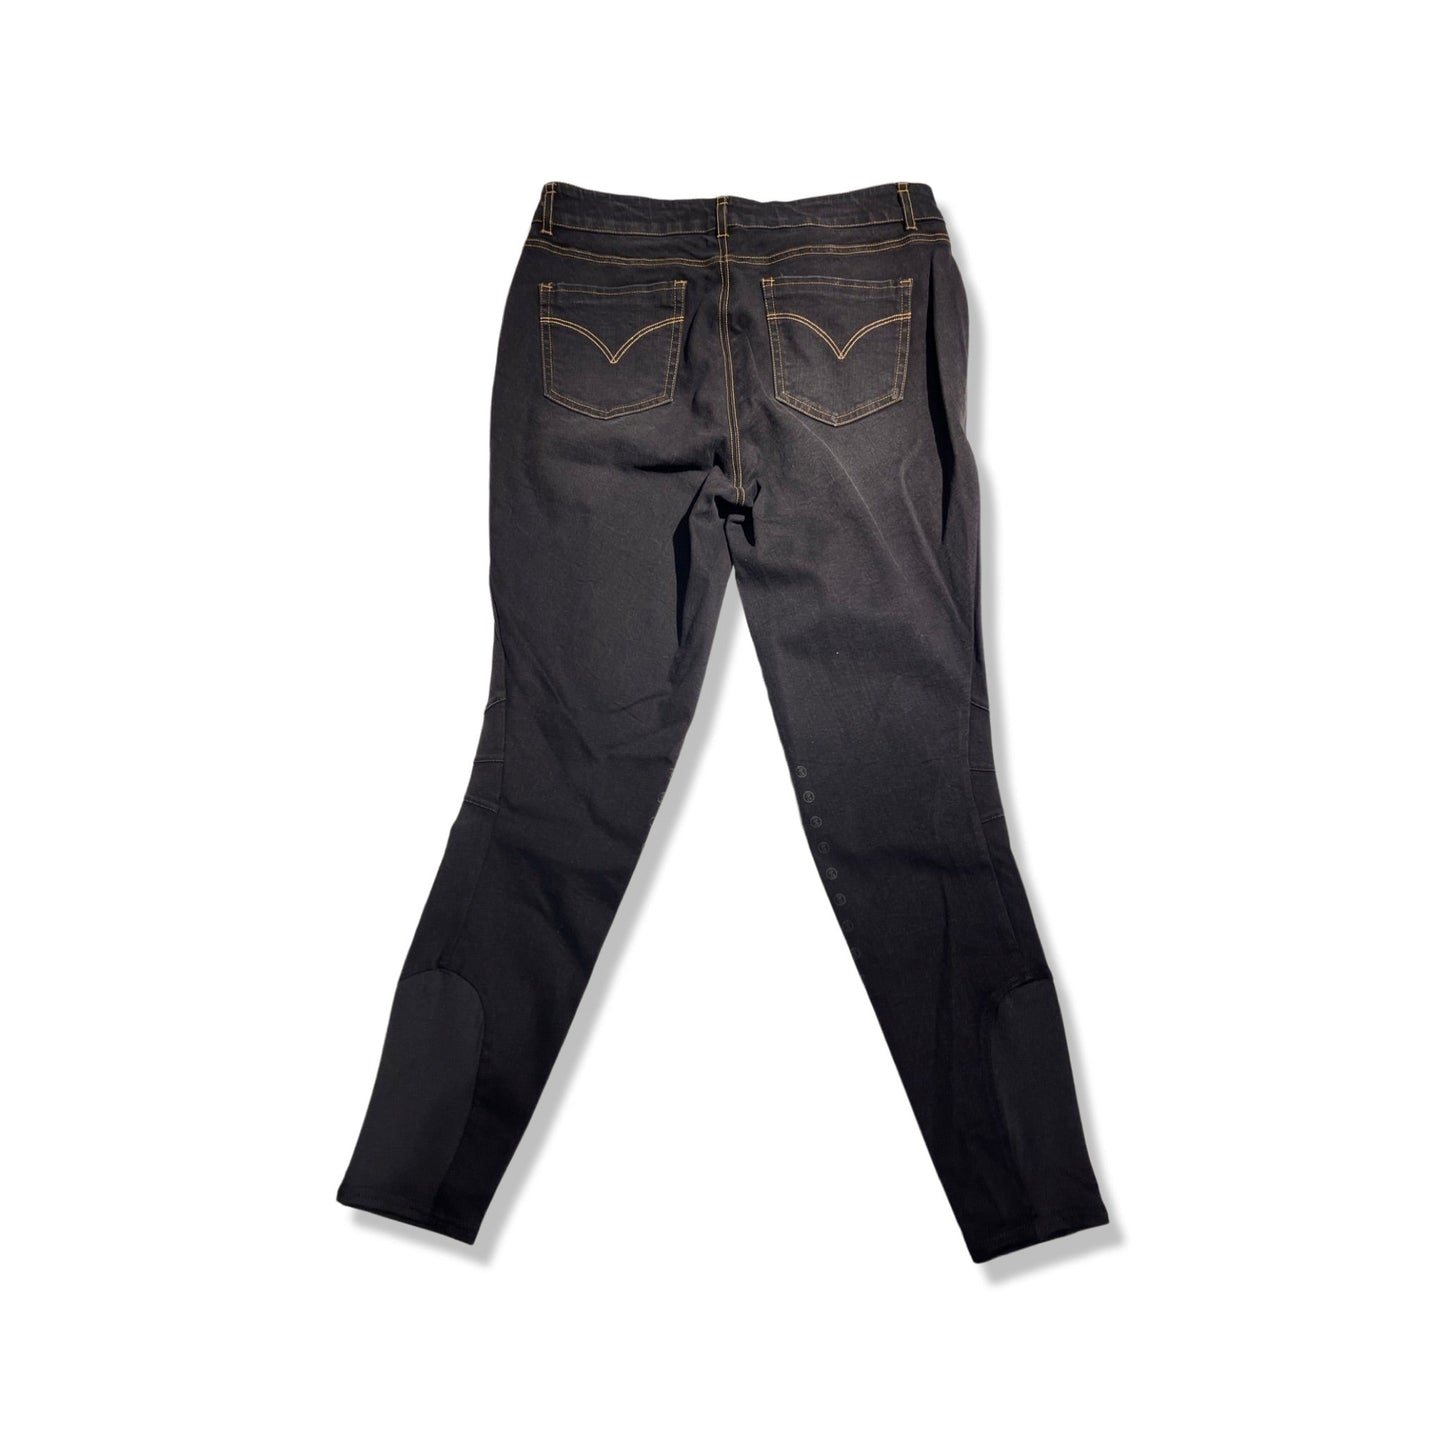 PS of Sweden Maggie Riding Breeches Ladies 44